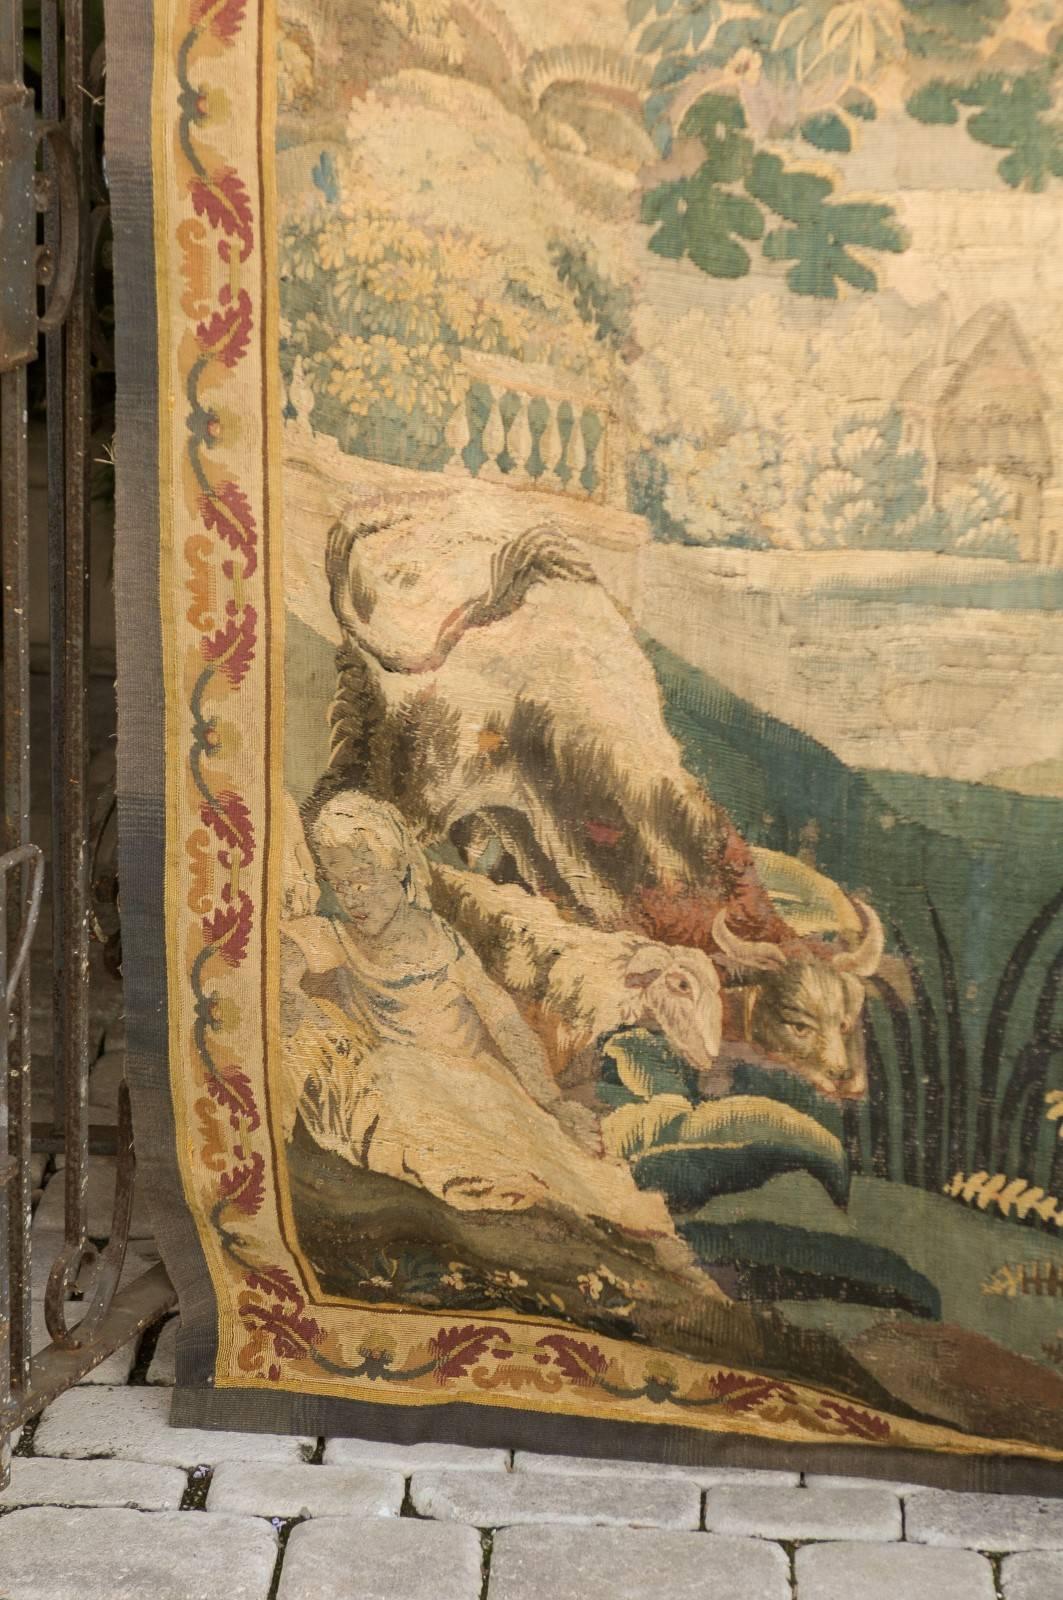 Woven French Aubusson Tapestry with Pastoral Scene in Vertical Format, circa 1800